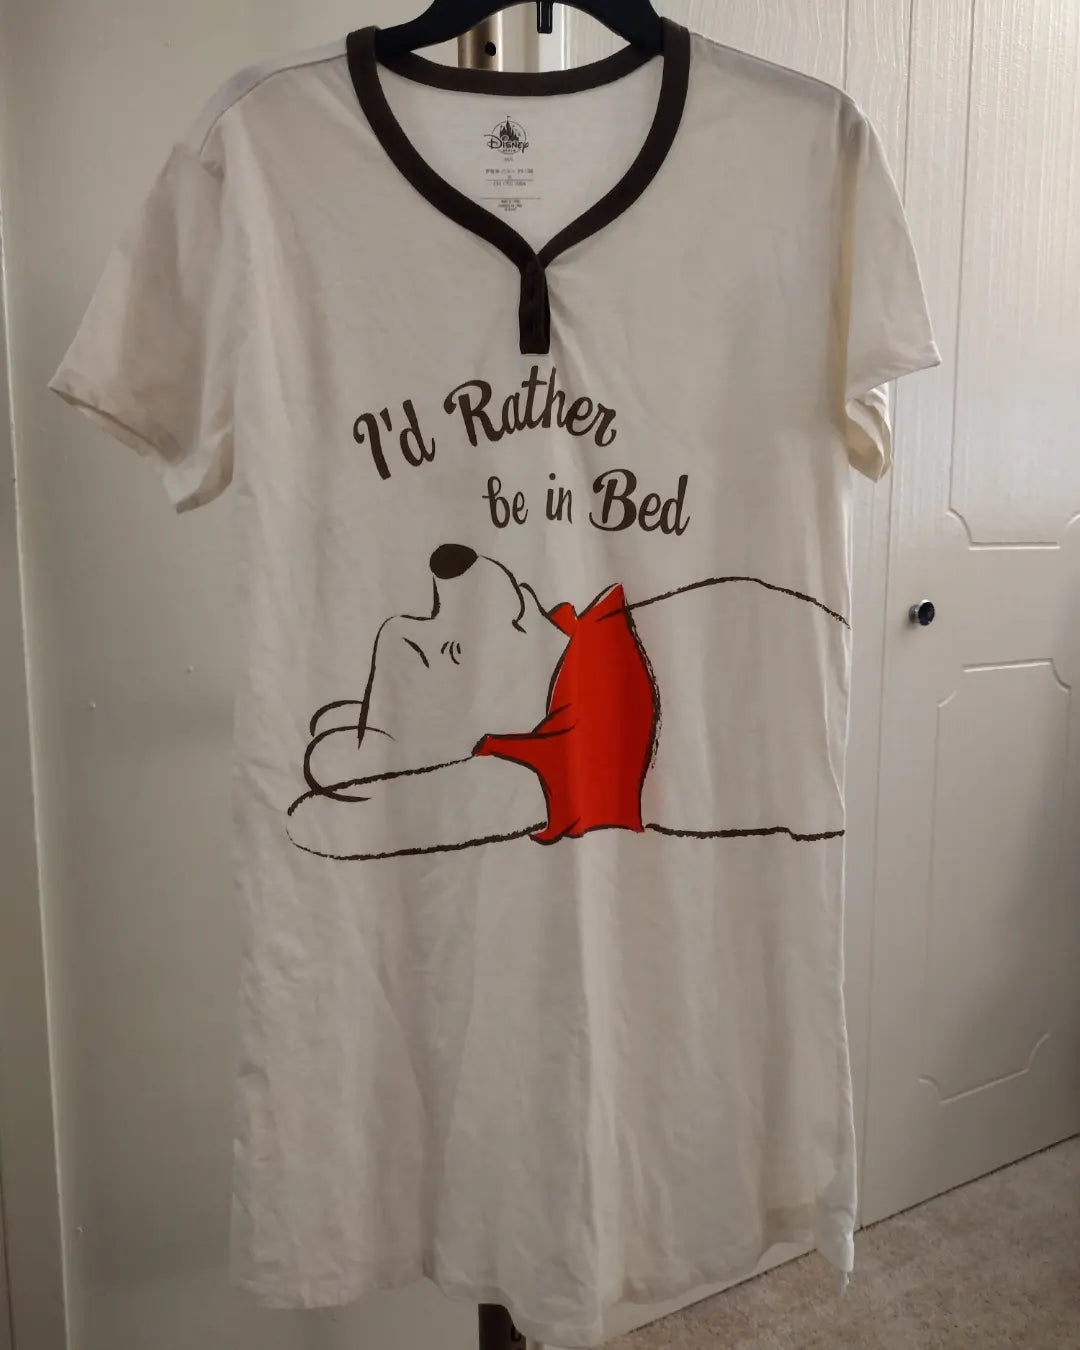 Disney Winnie The Pooh " Id Rather Be in Bed " Night Shirt Women's